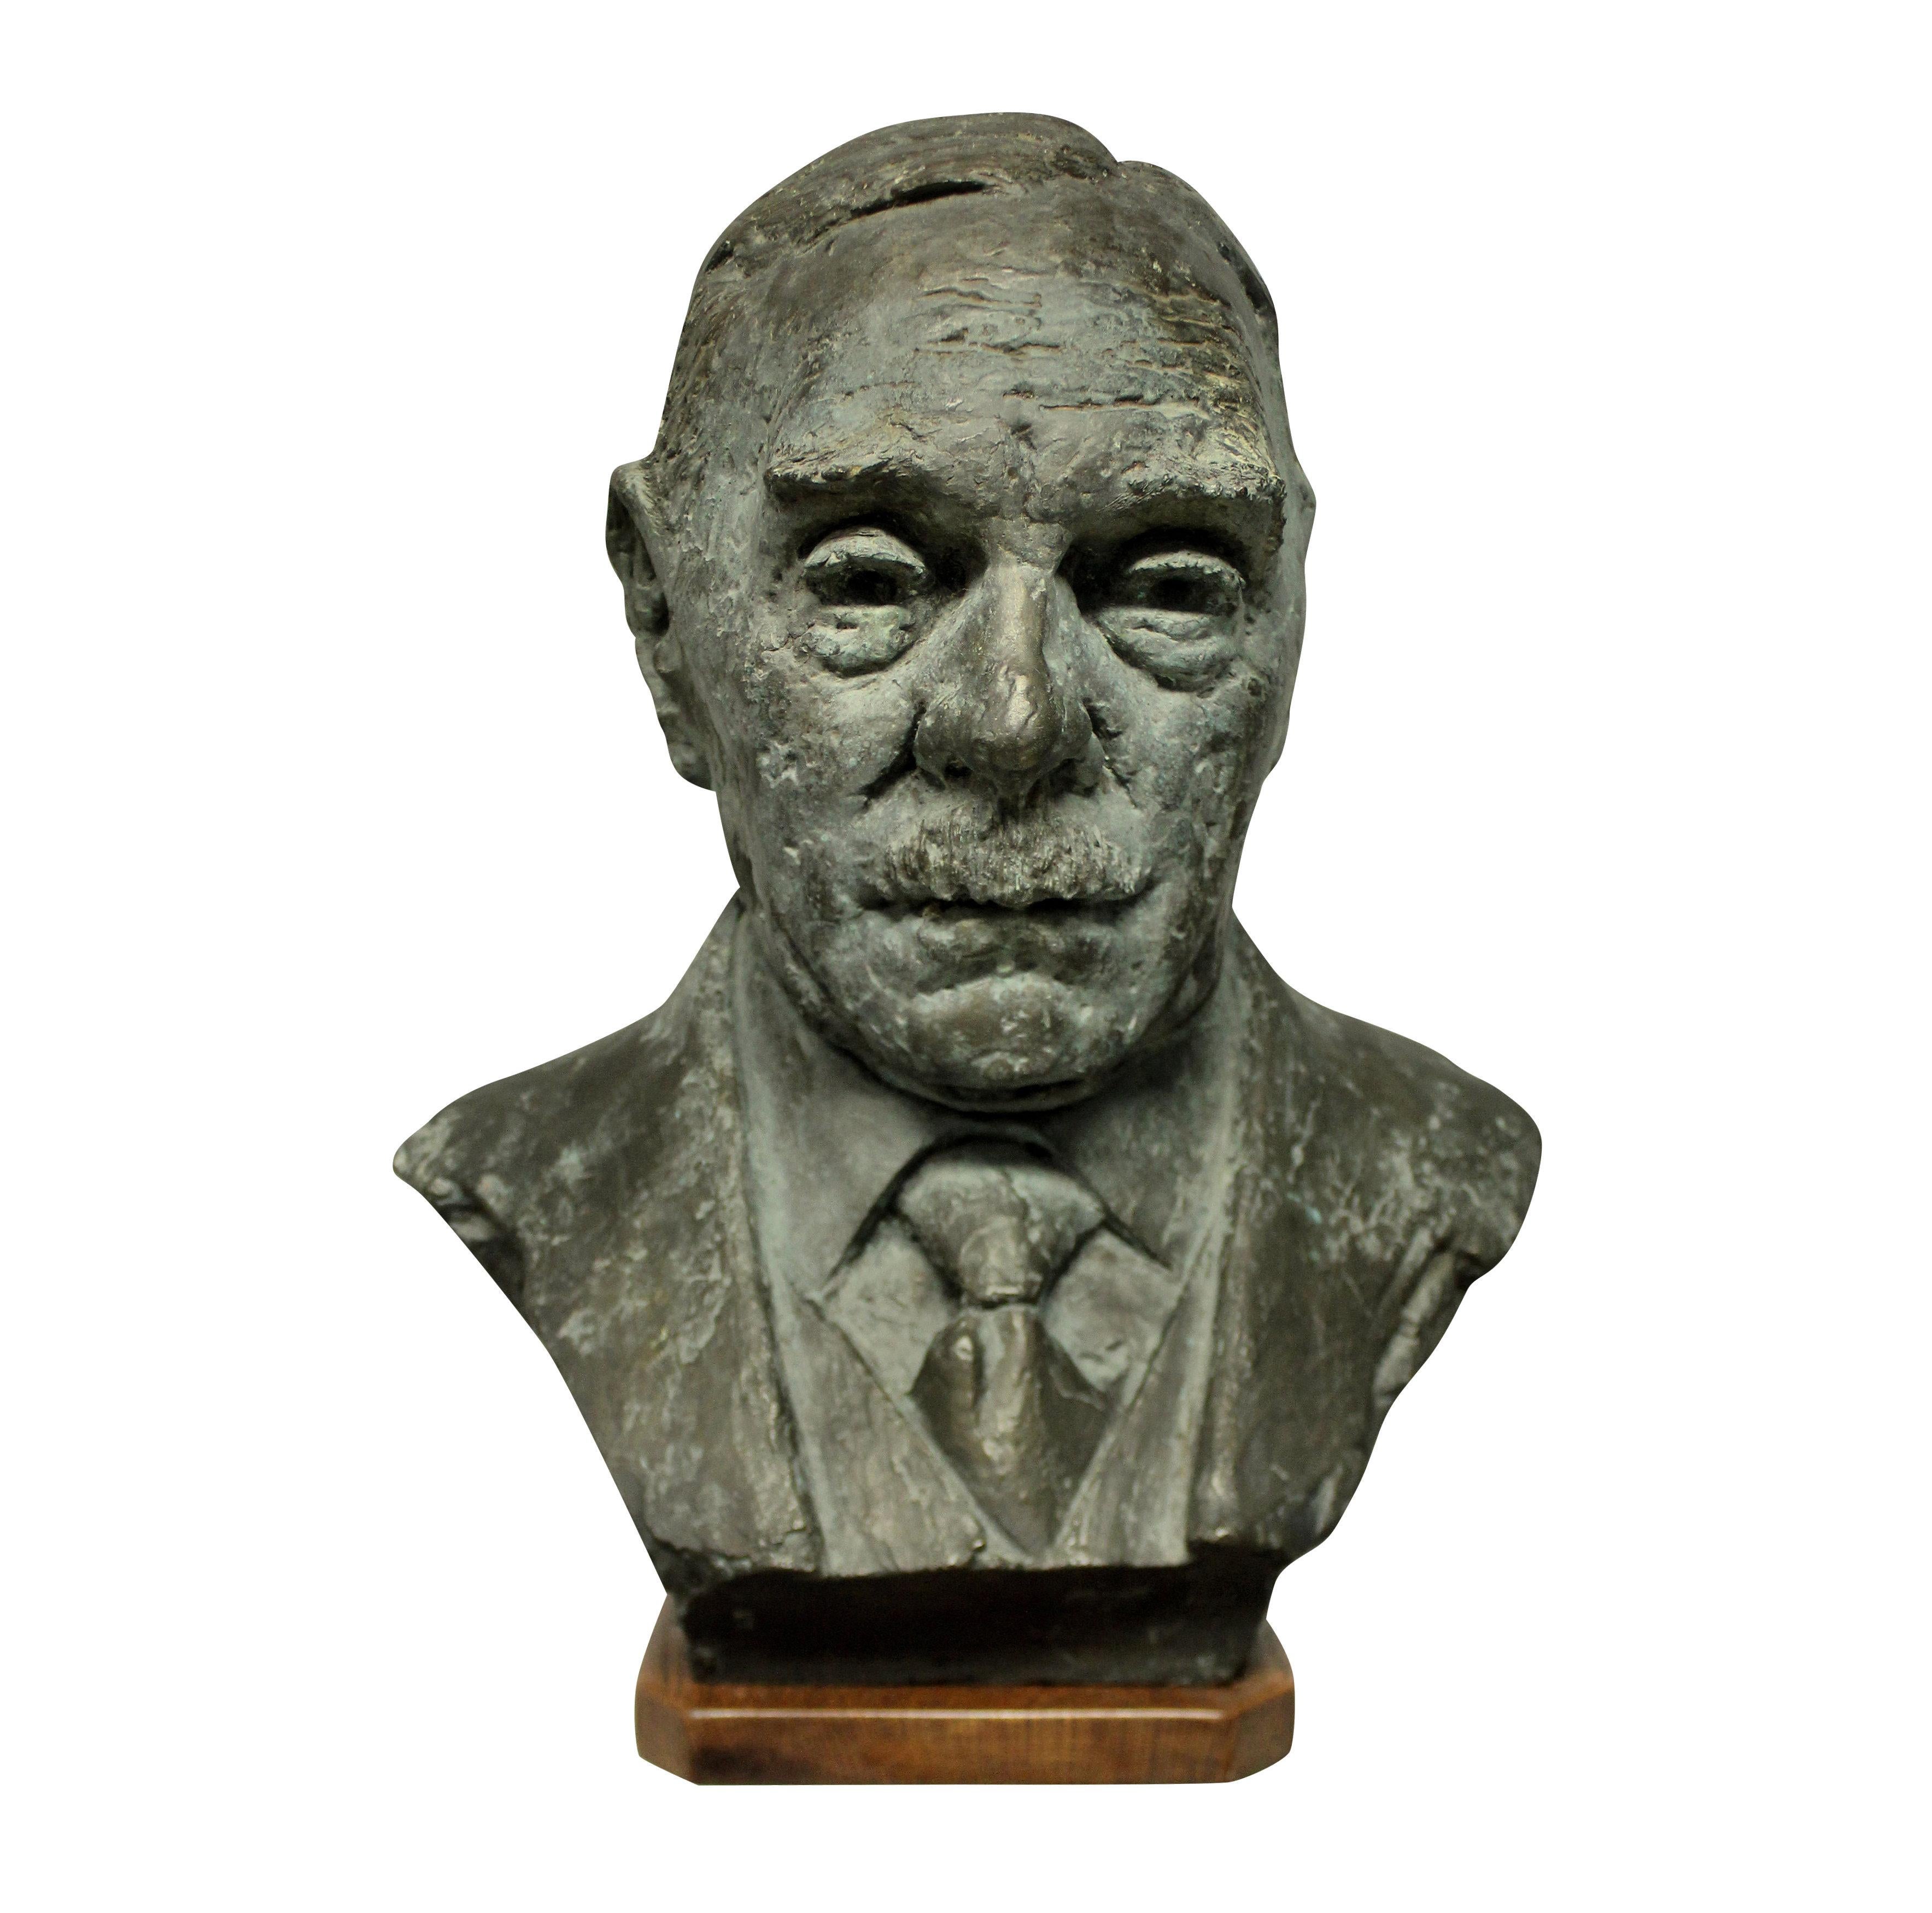 An English bronze bust of a gentleman in the manner of Jacob Epstein. Signed and dated DB 1960.